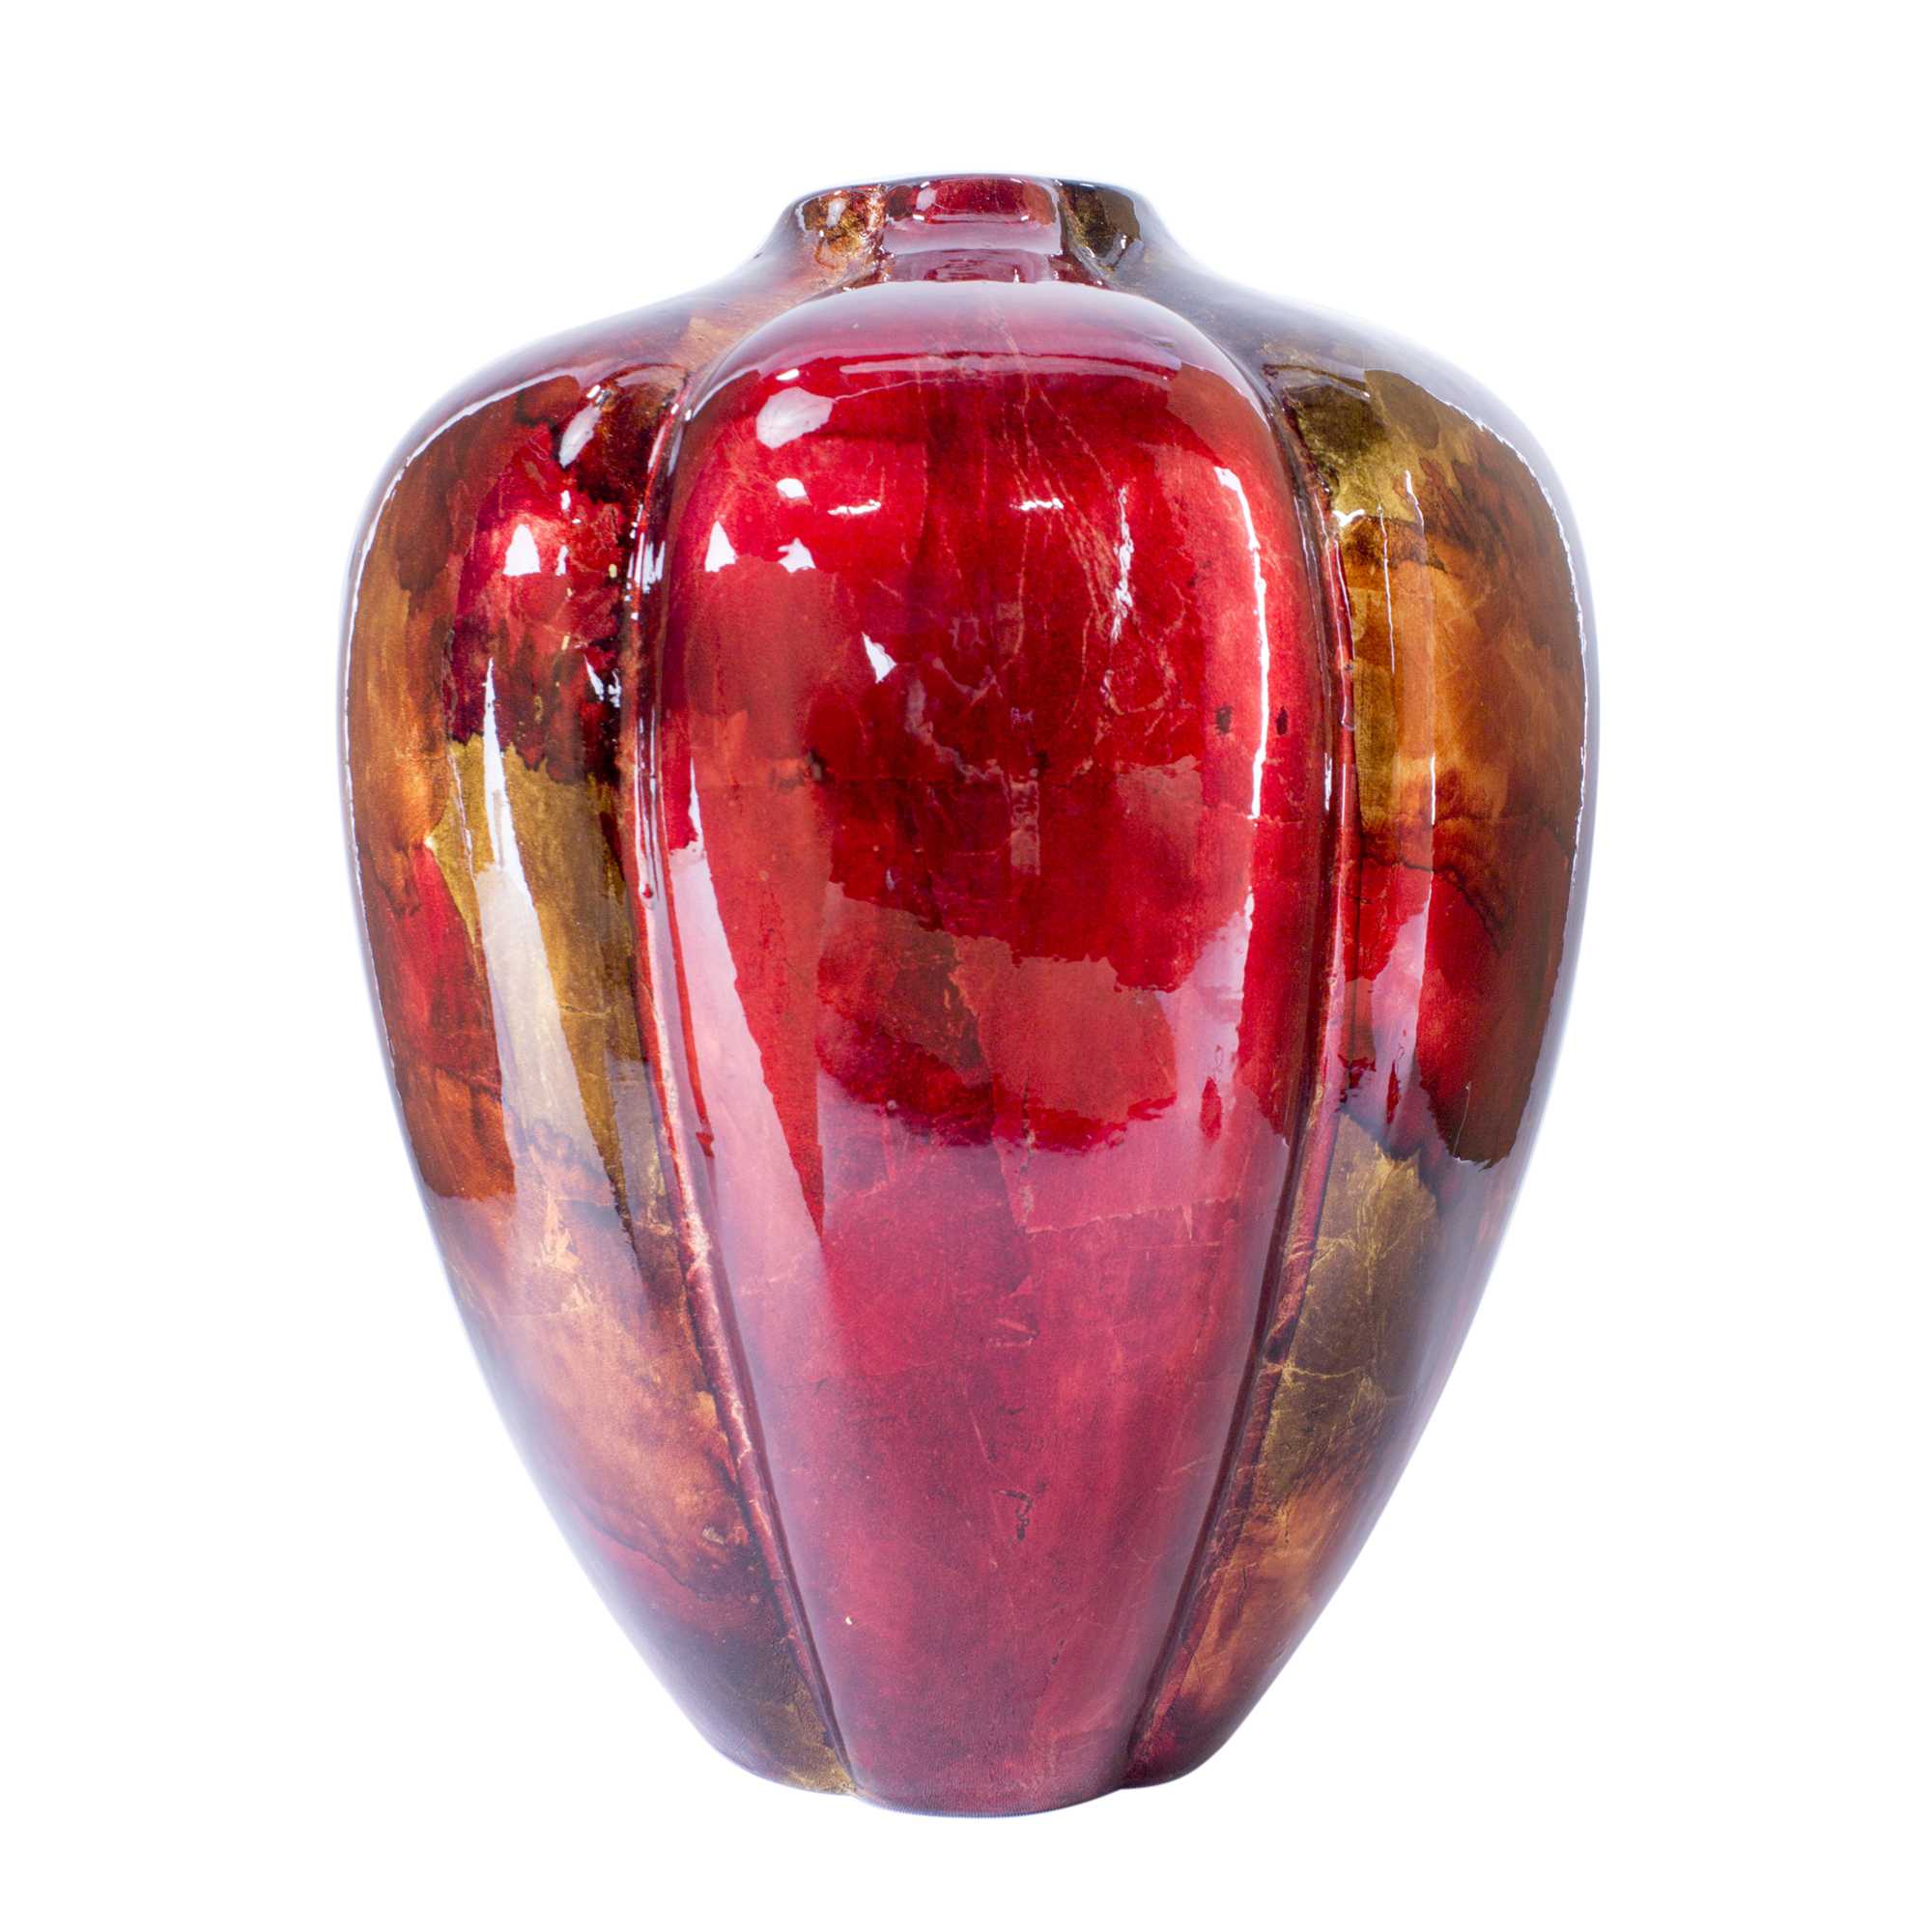 9.75" X 9.75" X 11.75" Copper Red Gold Ceramic Foiled and Lacquered Sculpted Gourd Vase